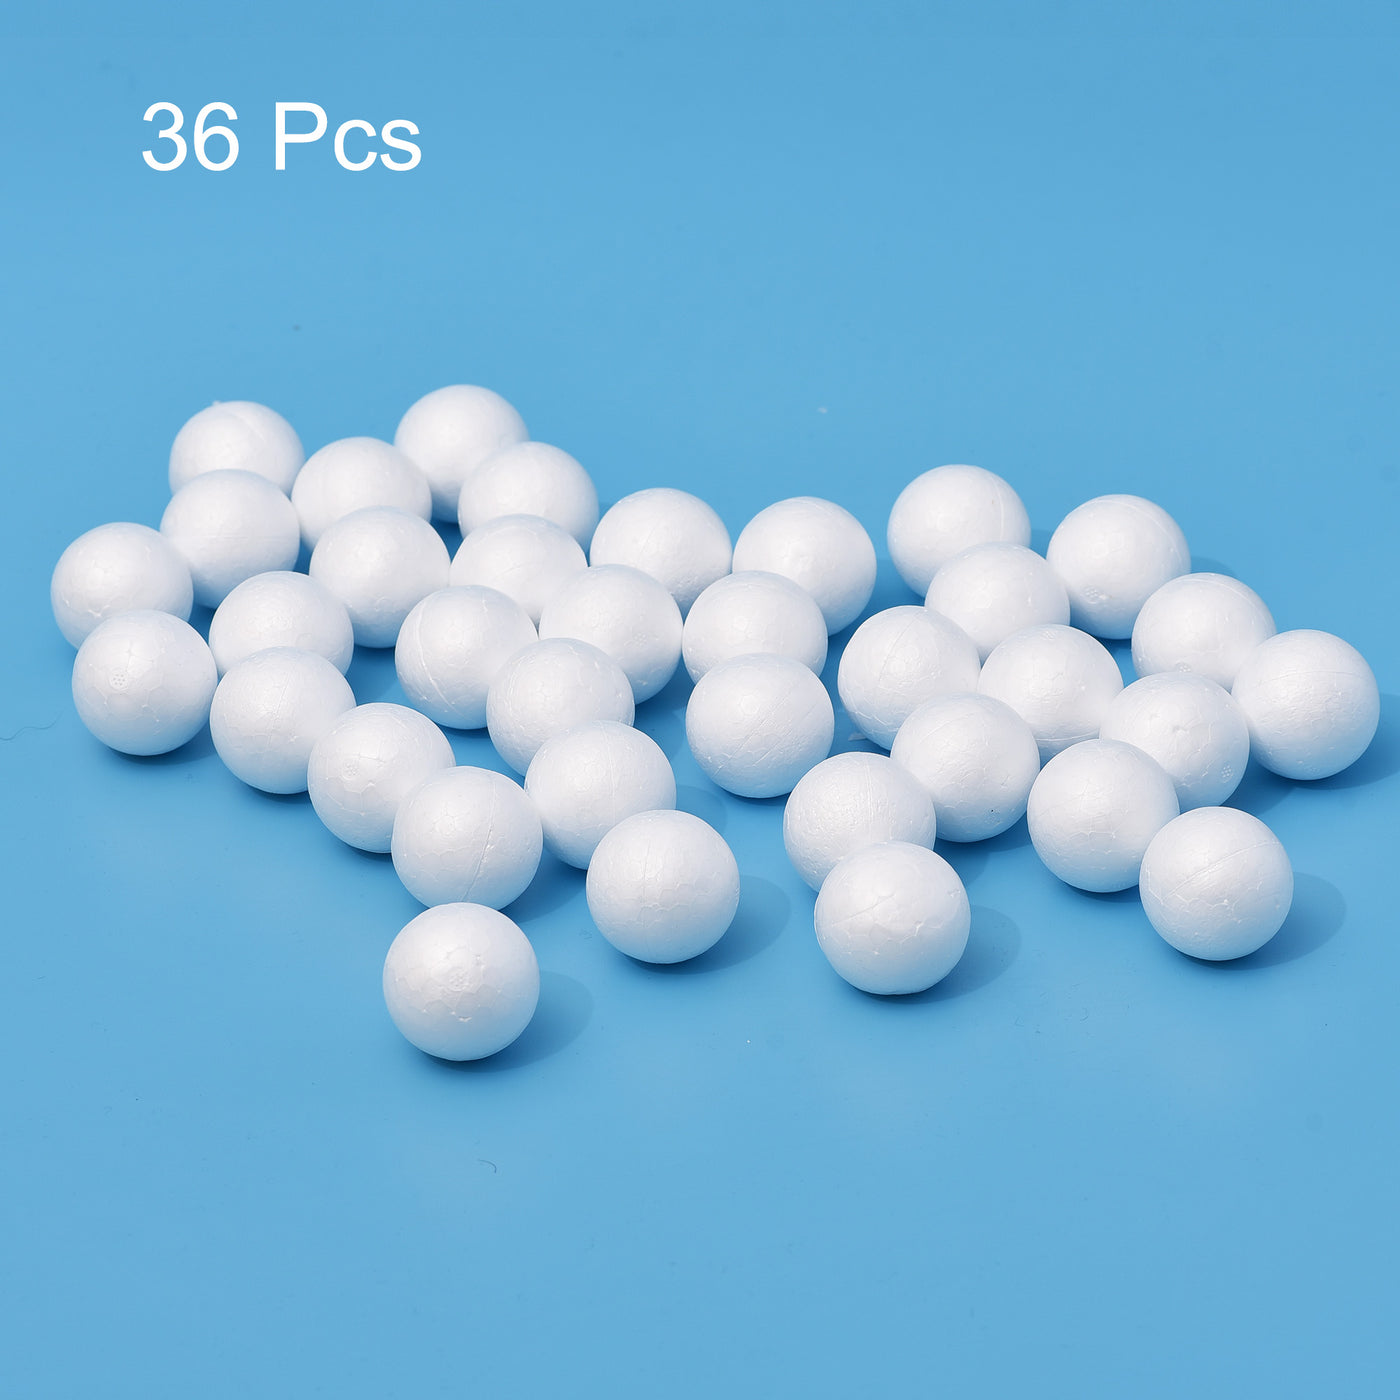 Uxcell Uxcell 36Pcs 2" White Polystyrene Foam Solid Balls for Crafts and Party Decorations